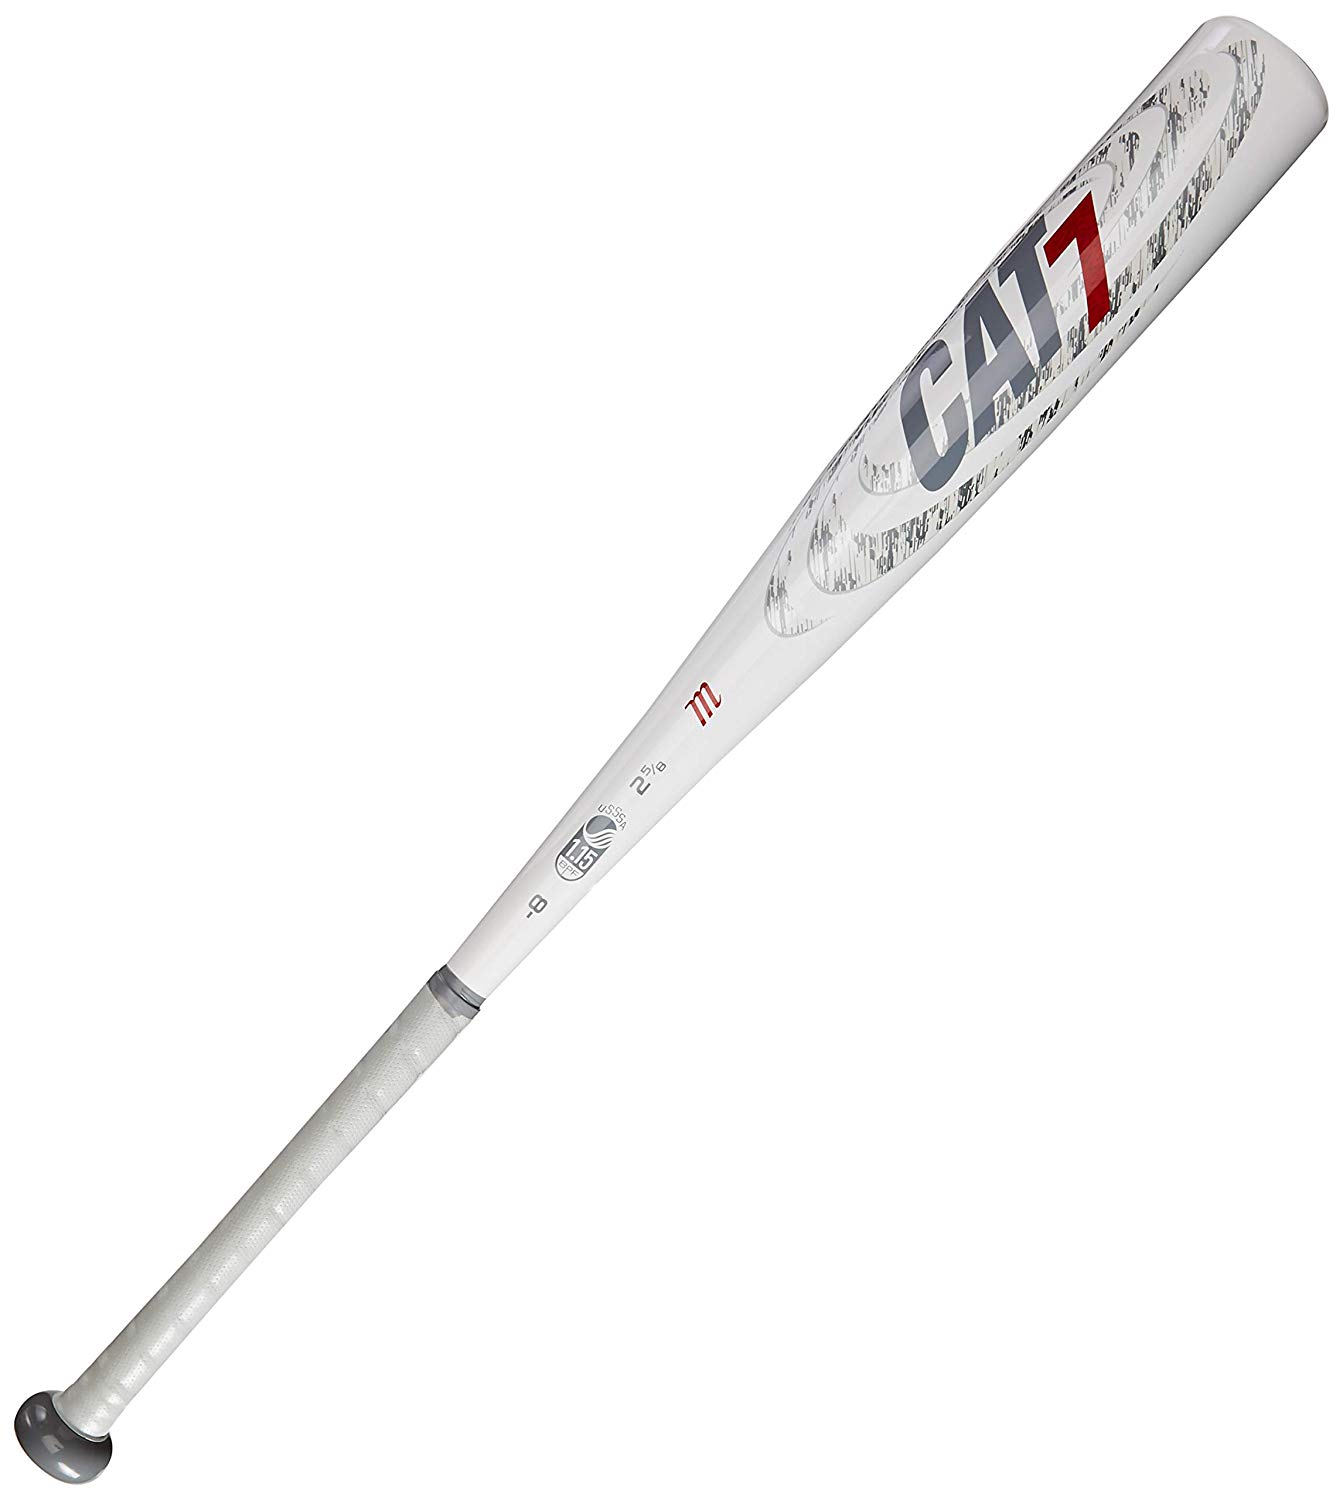 marucci-cat7-8-baseball-bat-31-inch-23-oz MSBYC78-3123 Marucci 849817039953 Az4x alloy construction provides increased strength and a higher response rate.